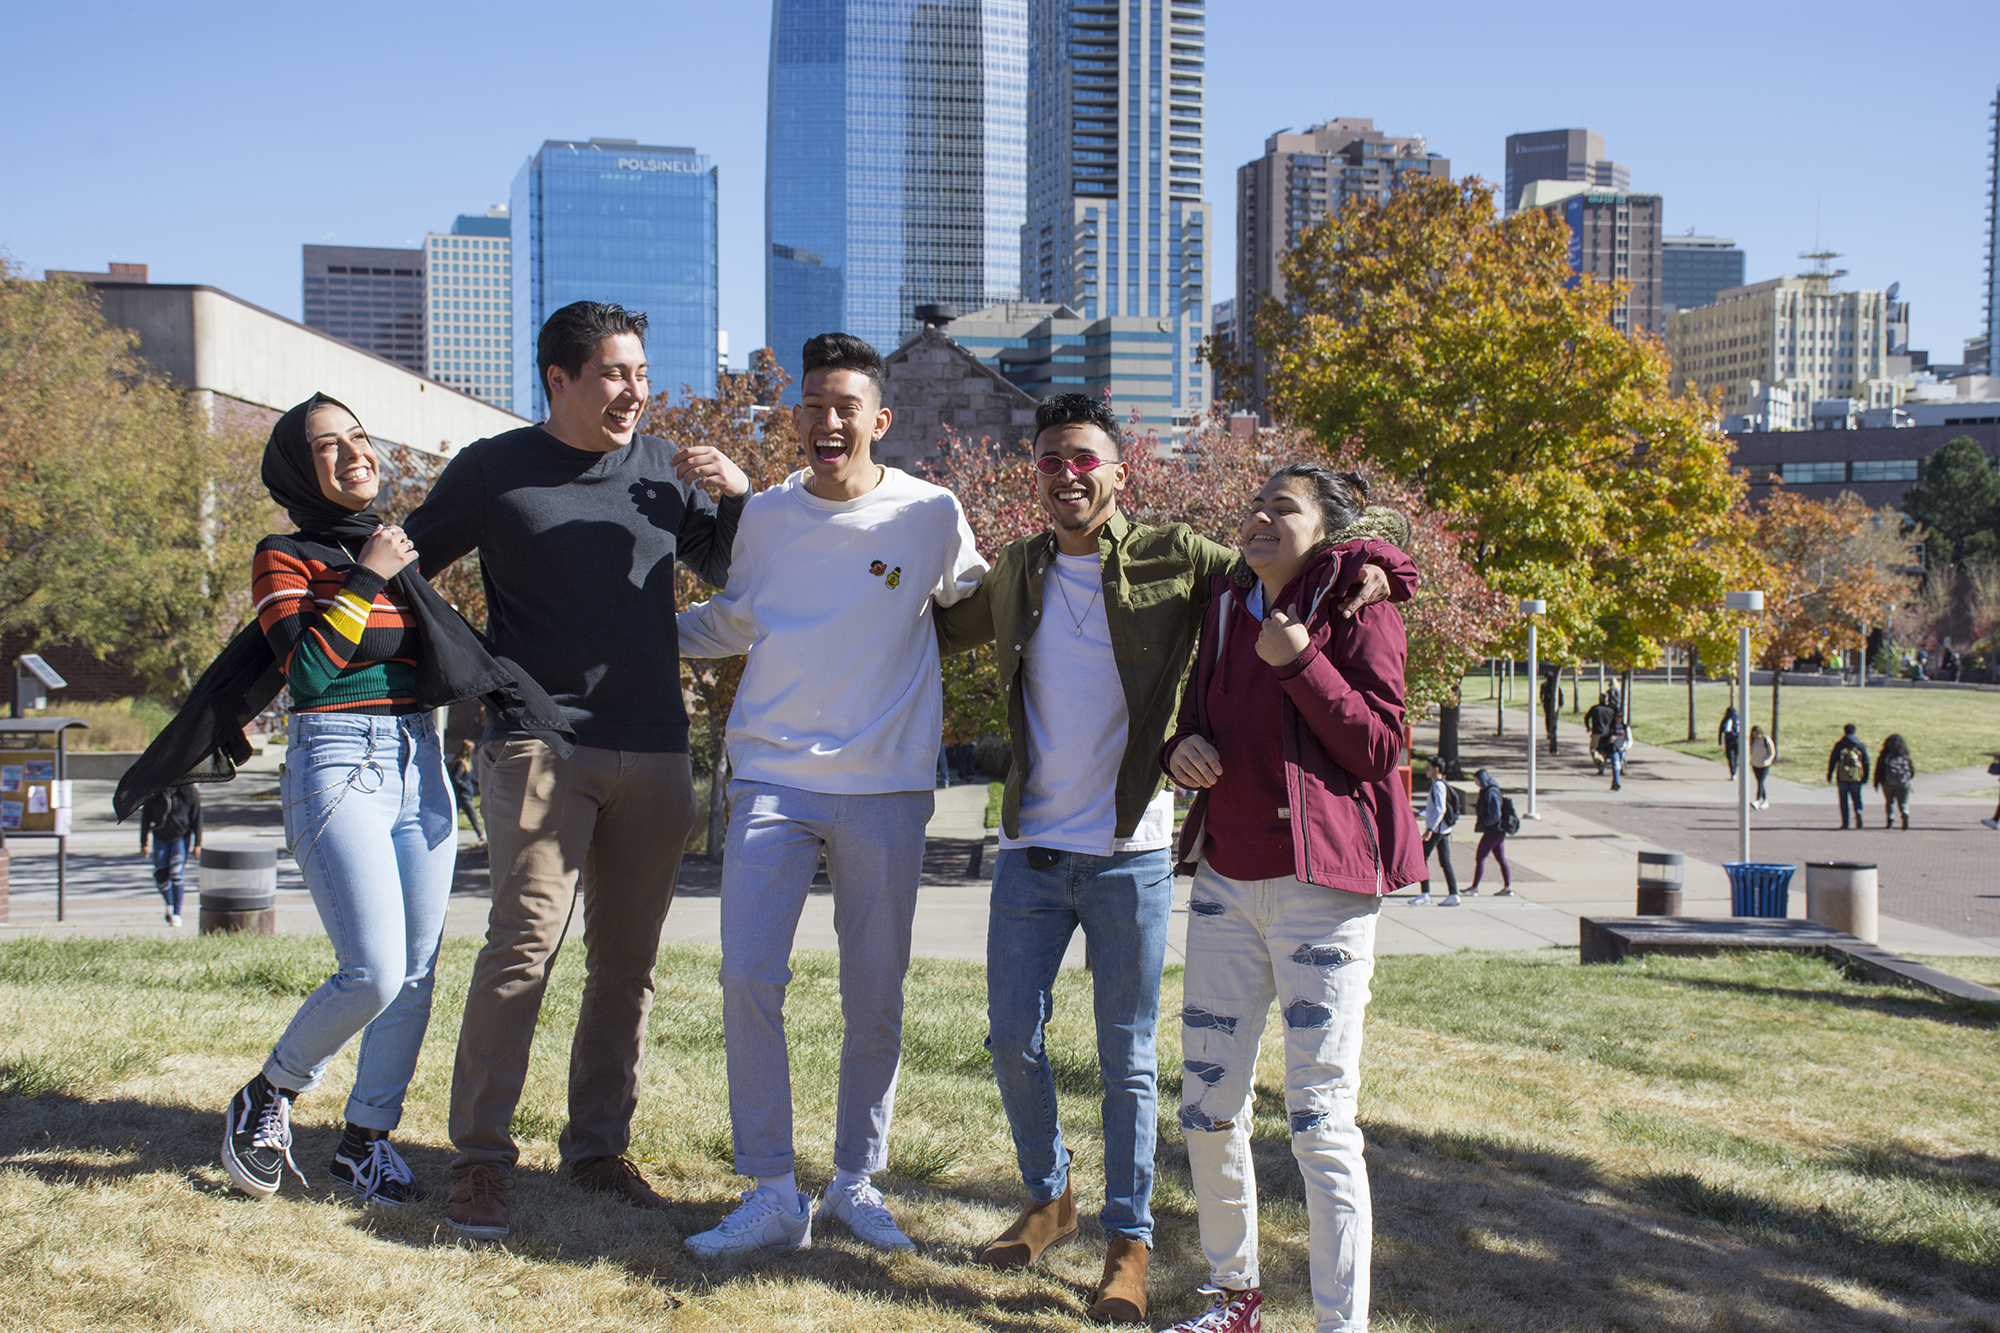 group of 5 students laughing on campus